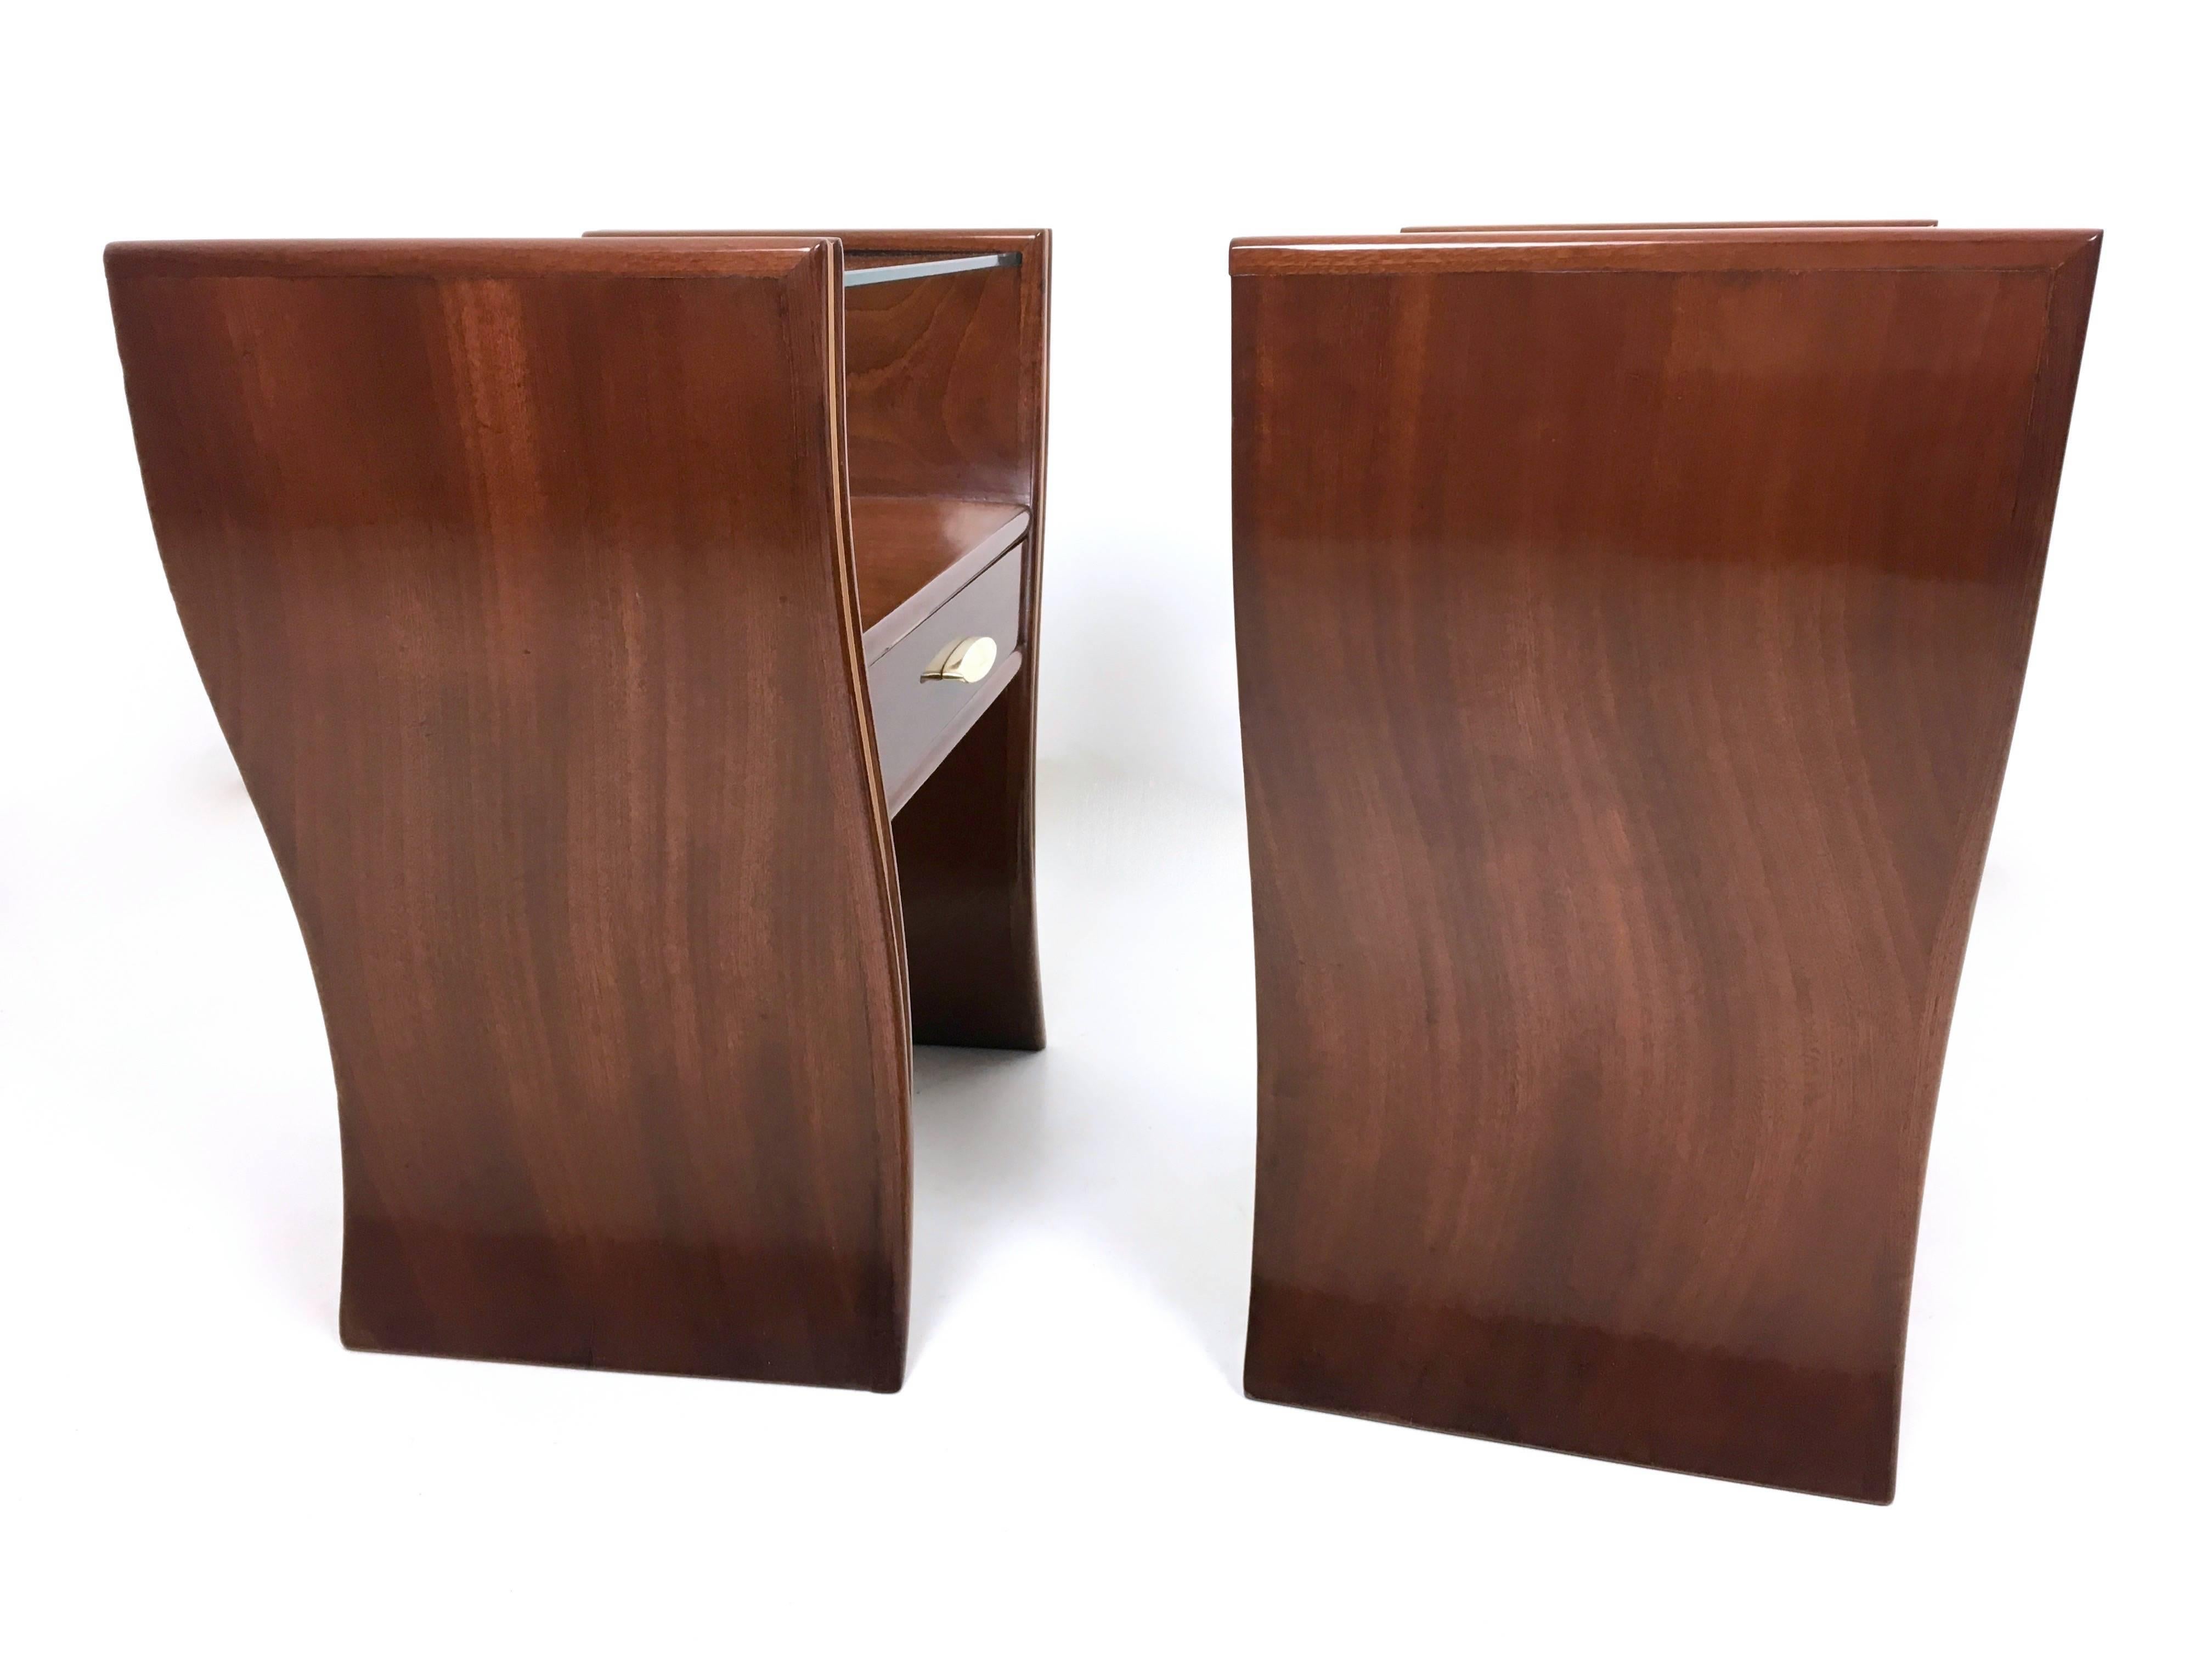 Mid-20th Century Pair of Wonderful Bedside Tables Ascribable to Guglielmo Ulrich, 1940s-1950s